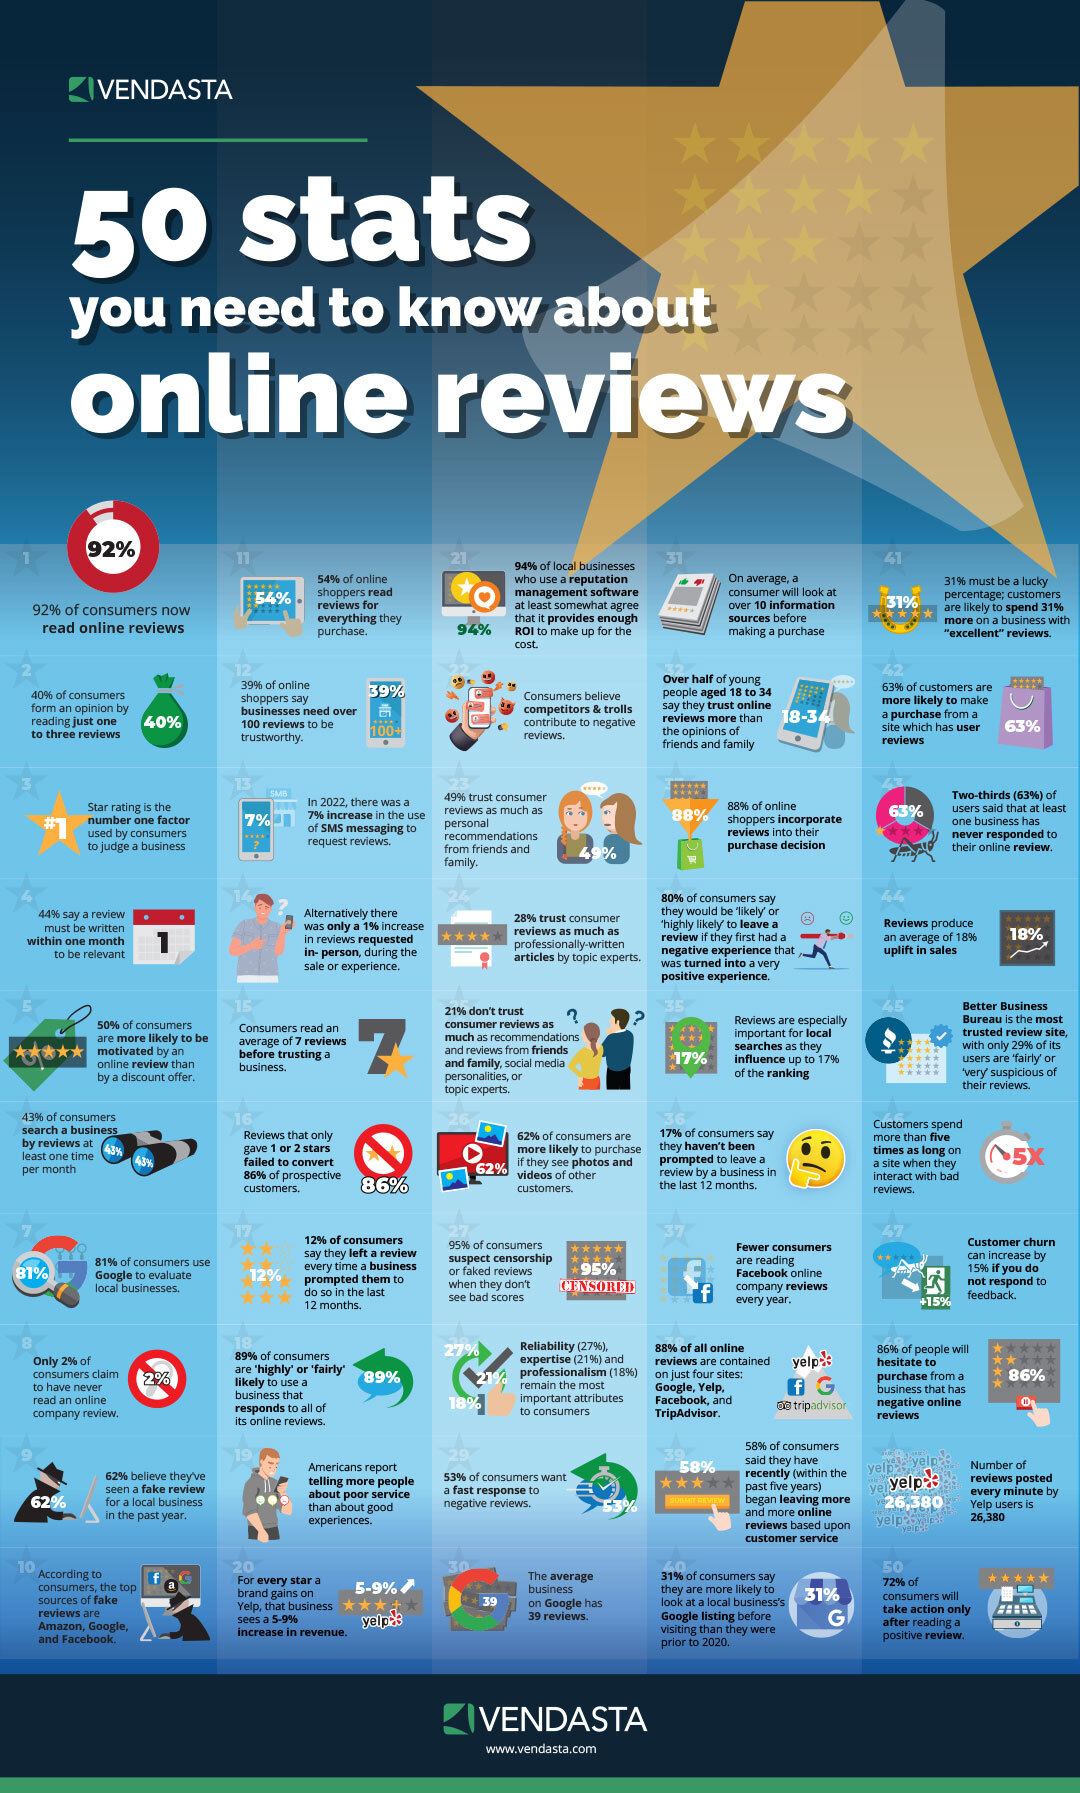 How to turn negative online reviews into marketing wins